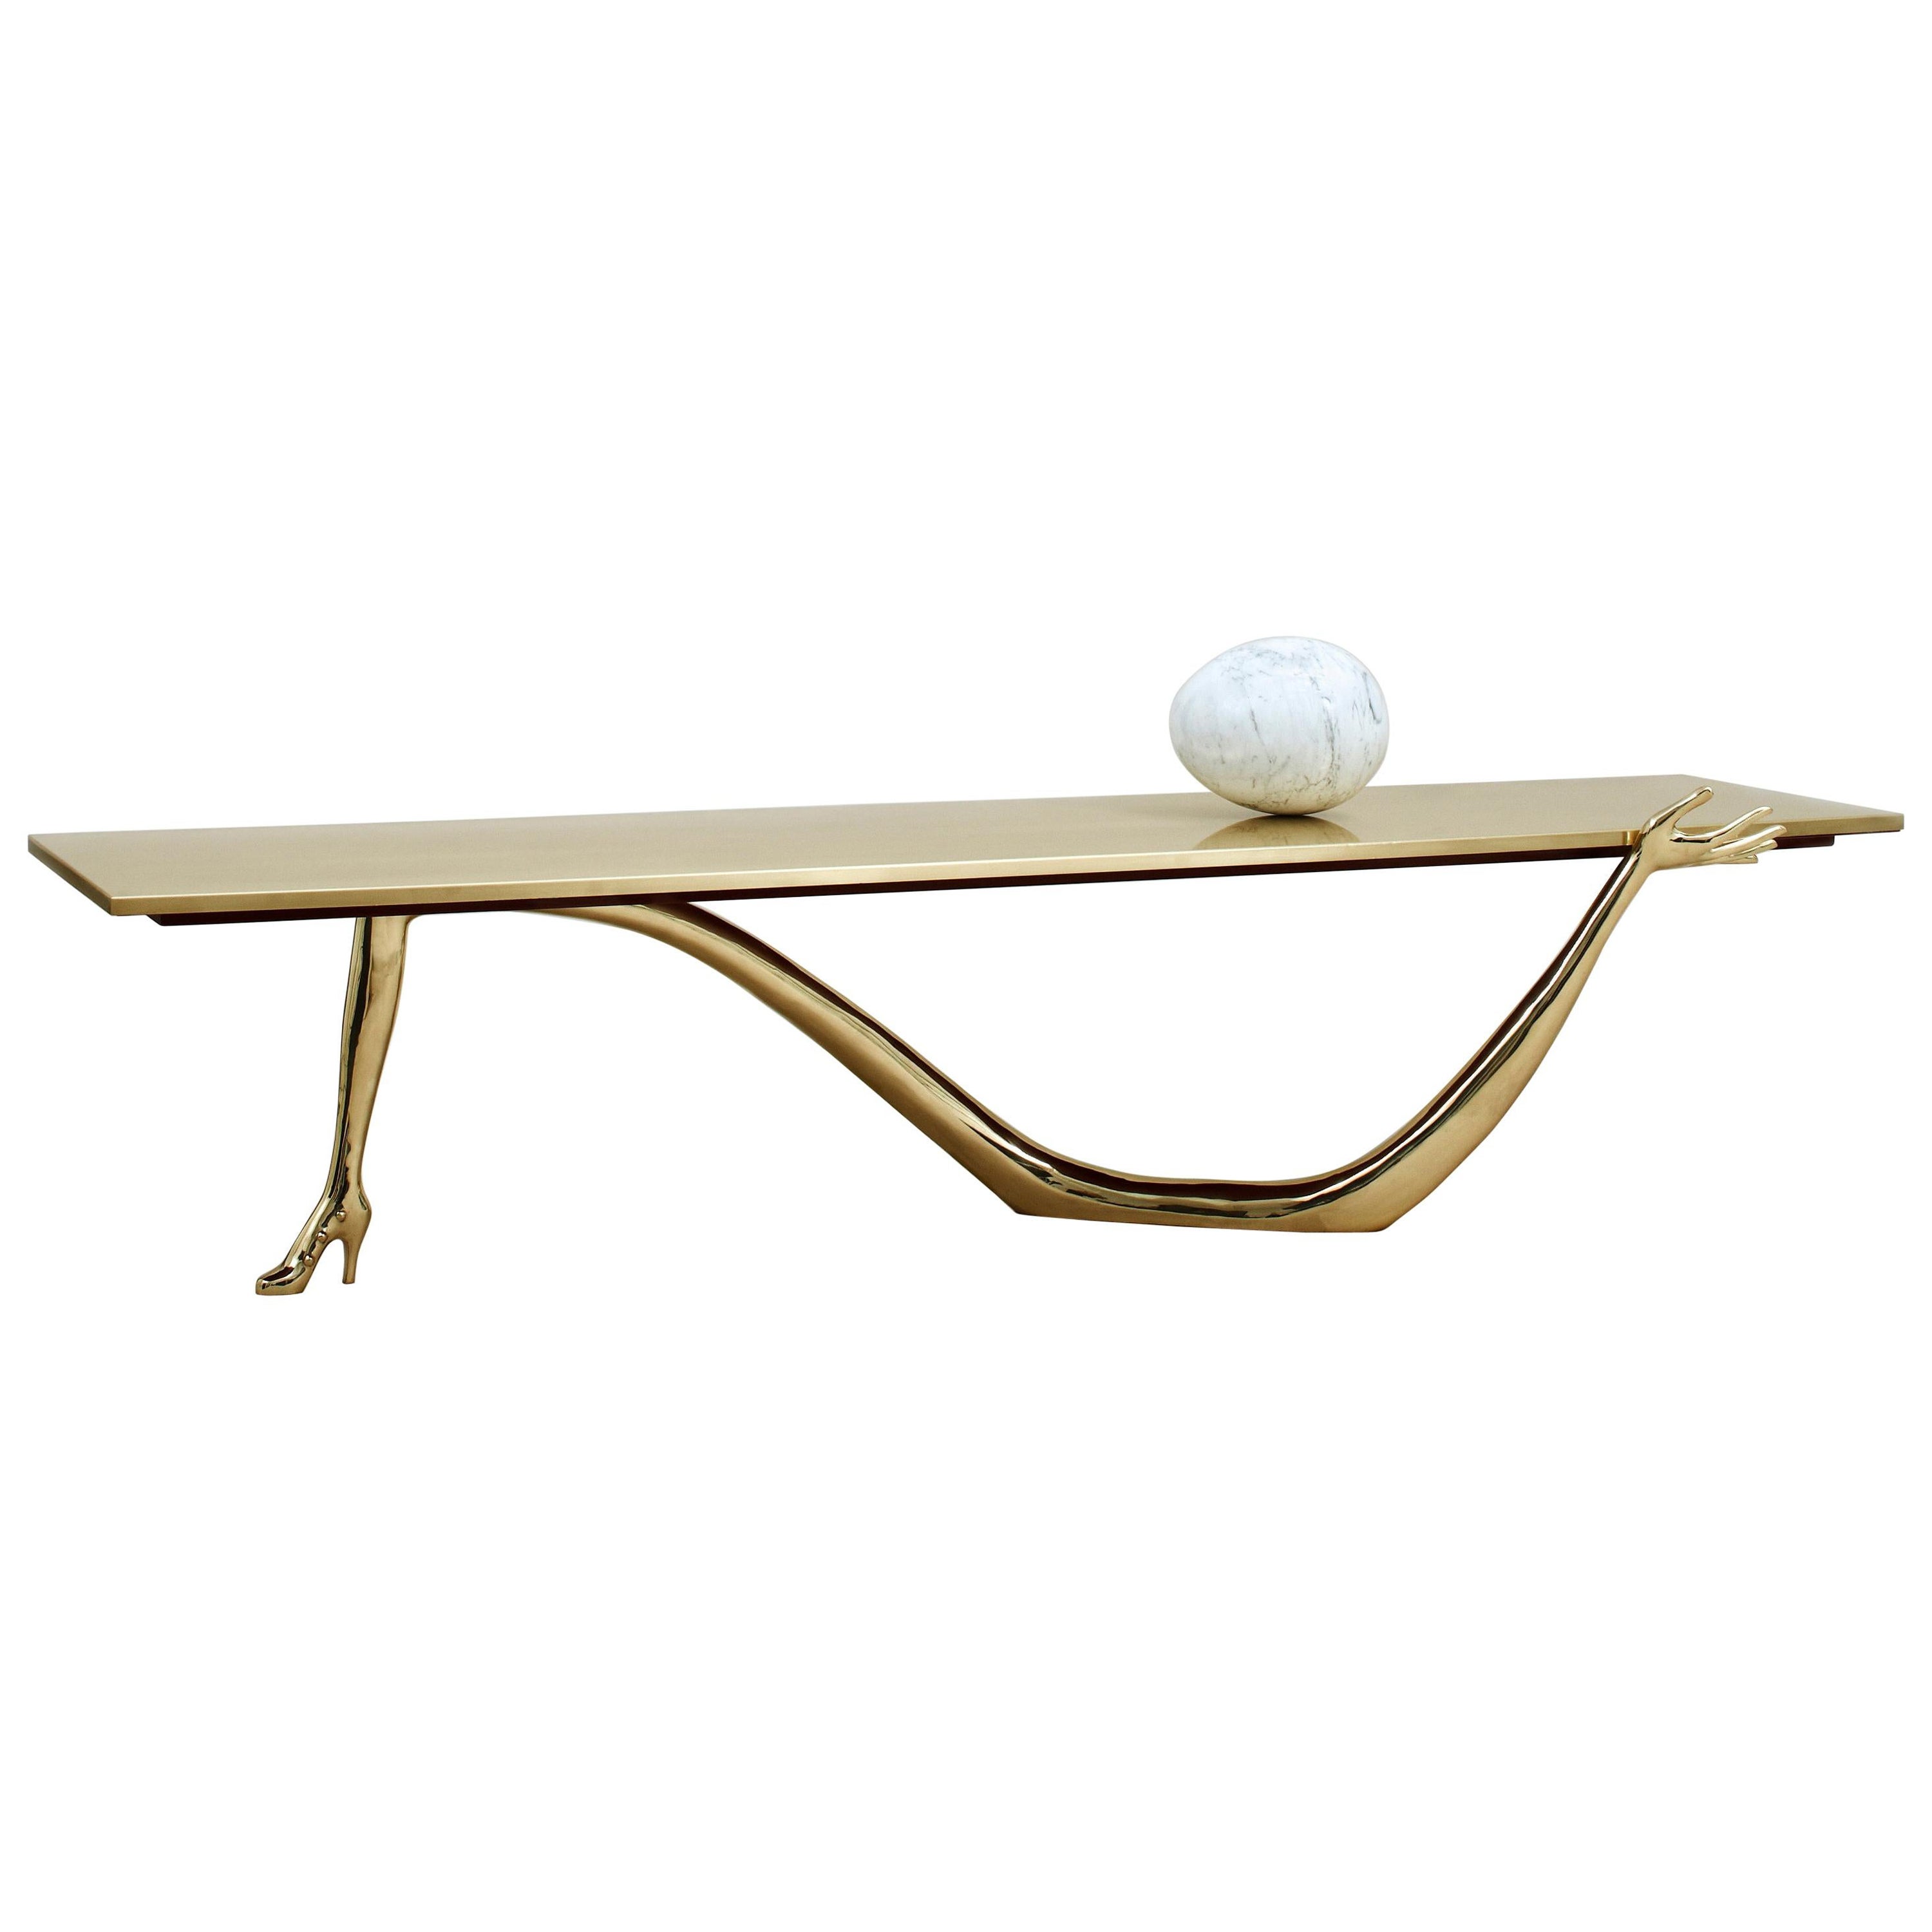 Low brass coffee table model "Leda" by Salvador Dalí 20th century spanish design For Sale